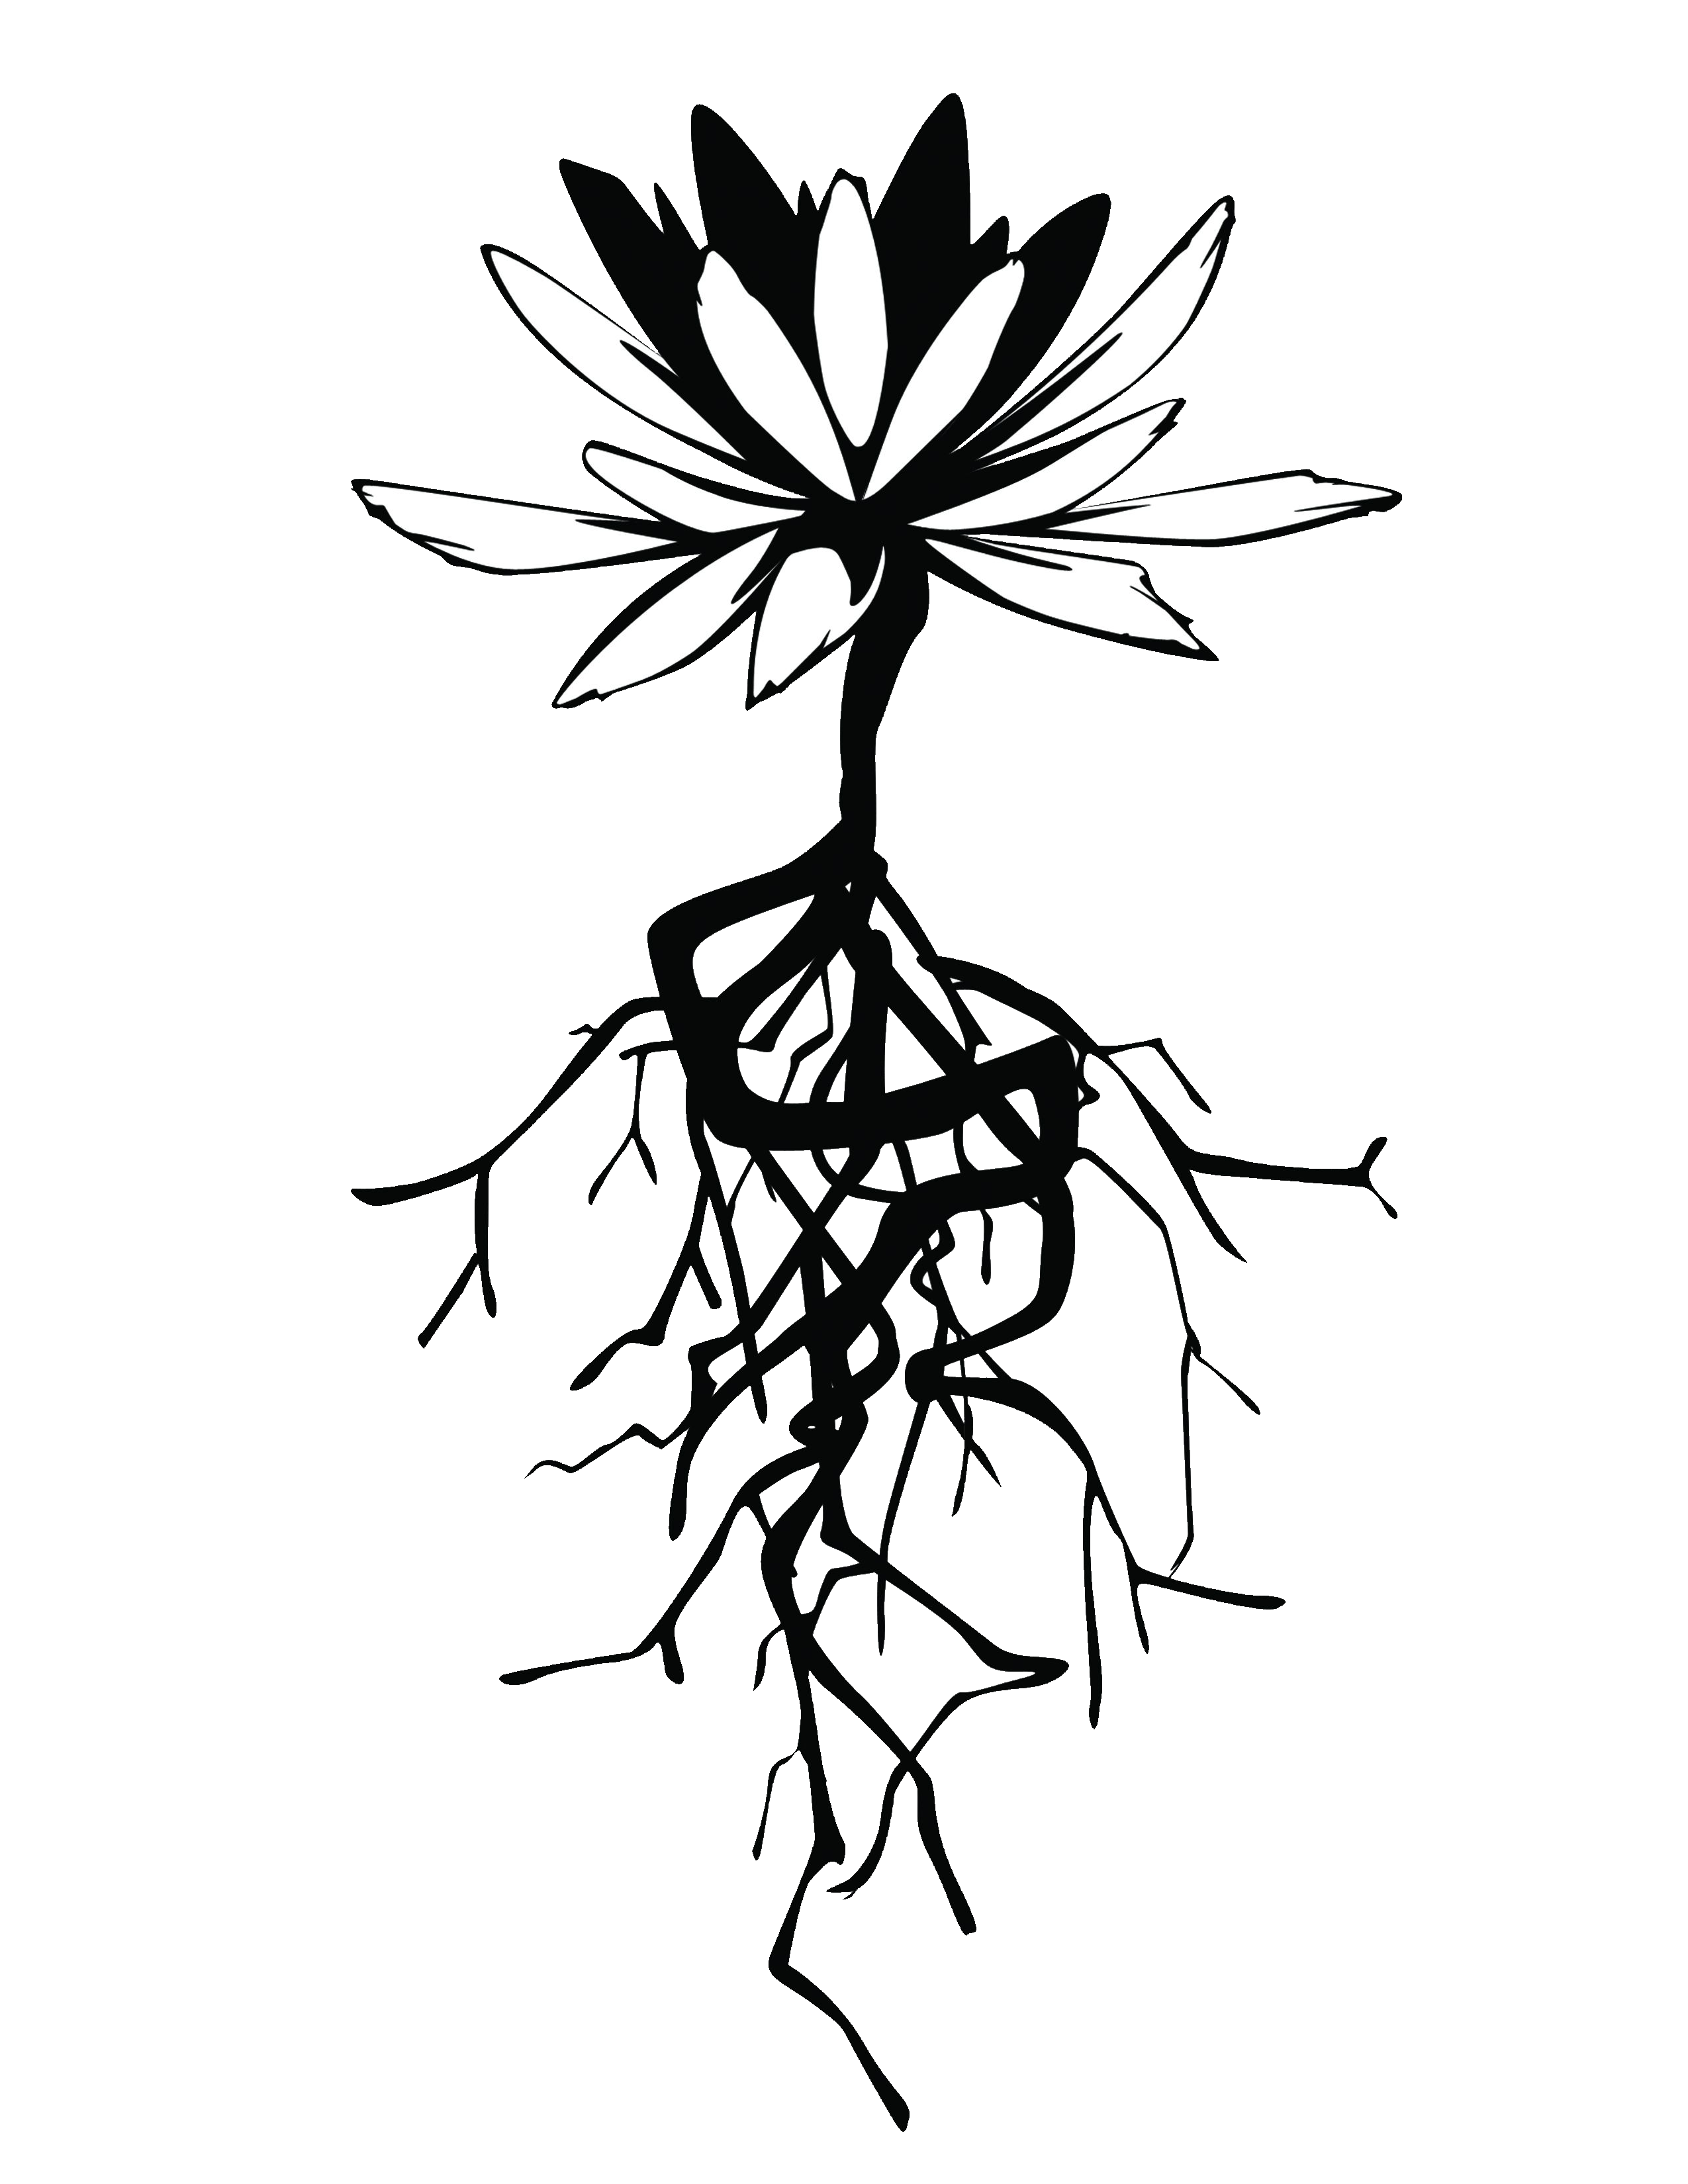 Flower roots drawing at. Flowers clipart root